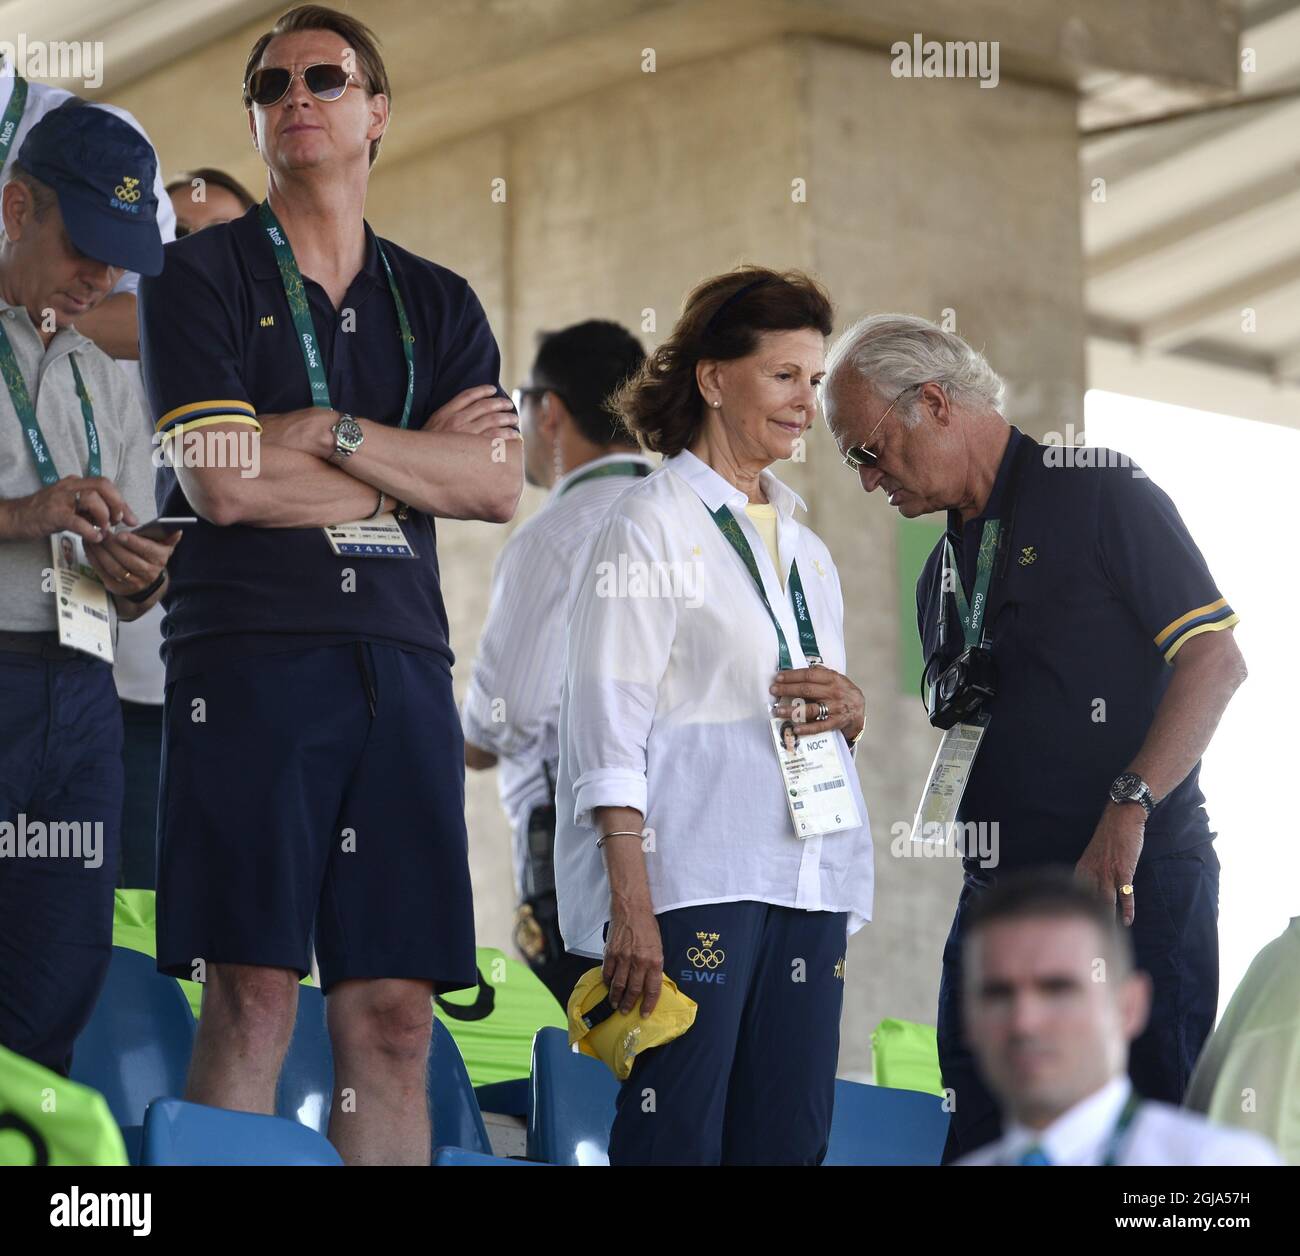 RIO DE JANEIRO 20160819 Sweden's Queen Silvia, King Carl Gustaf and to the  left Hans Vestberg, President of the Swedish Olympic Committee watch during  the Jumping Individual Final competition of the Rio